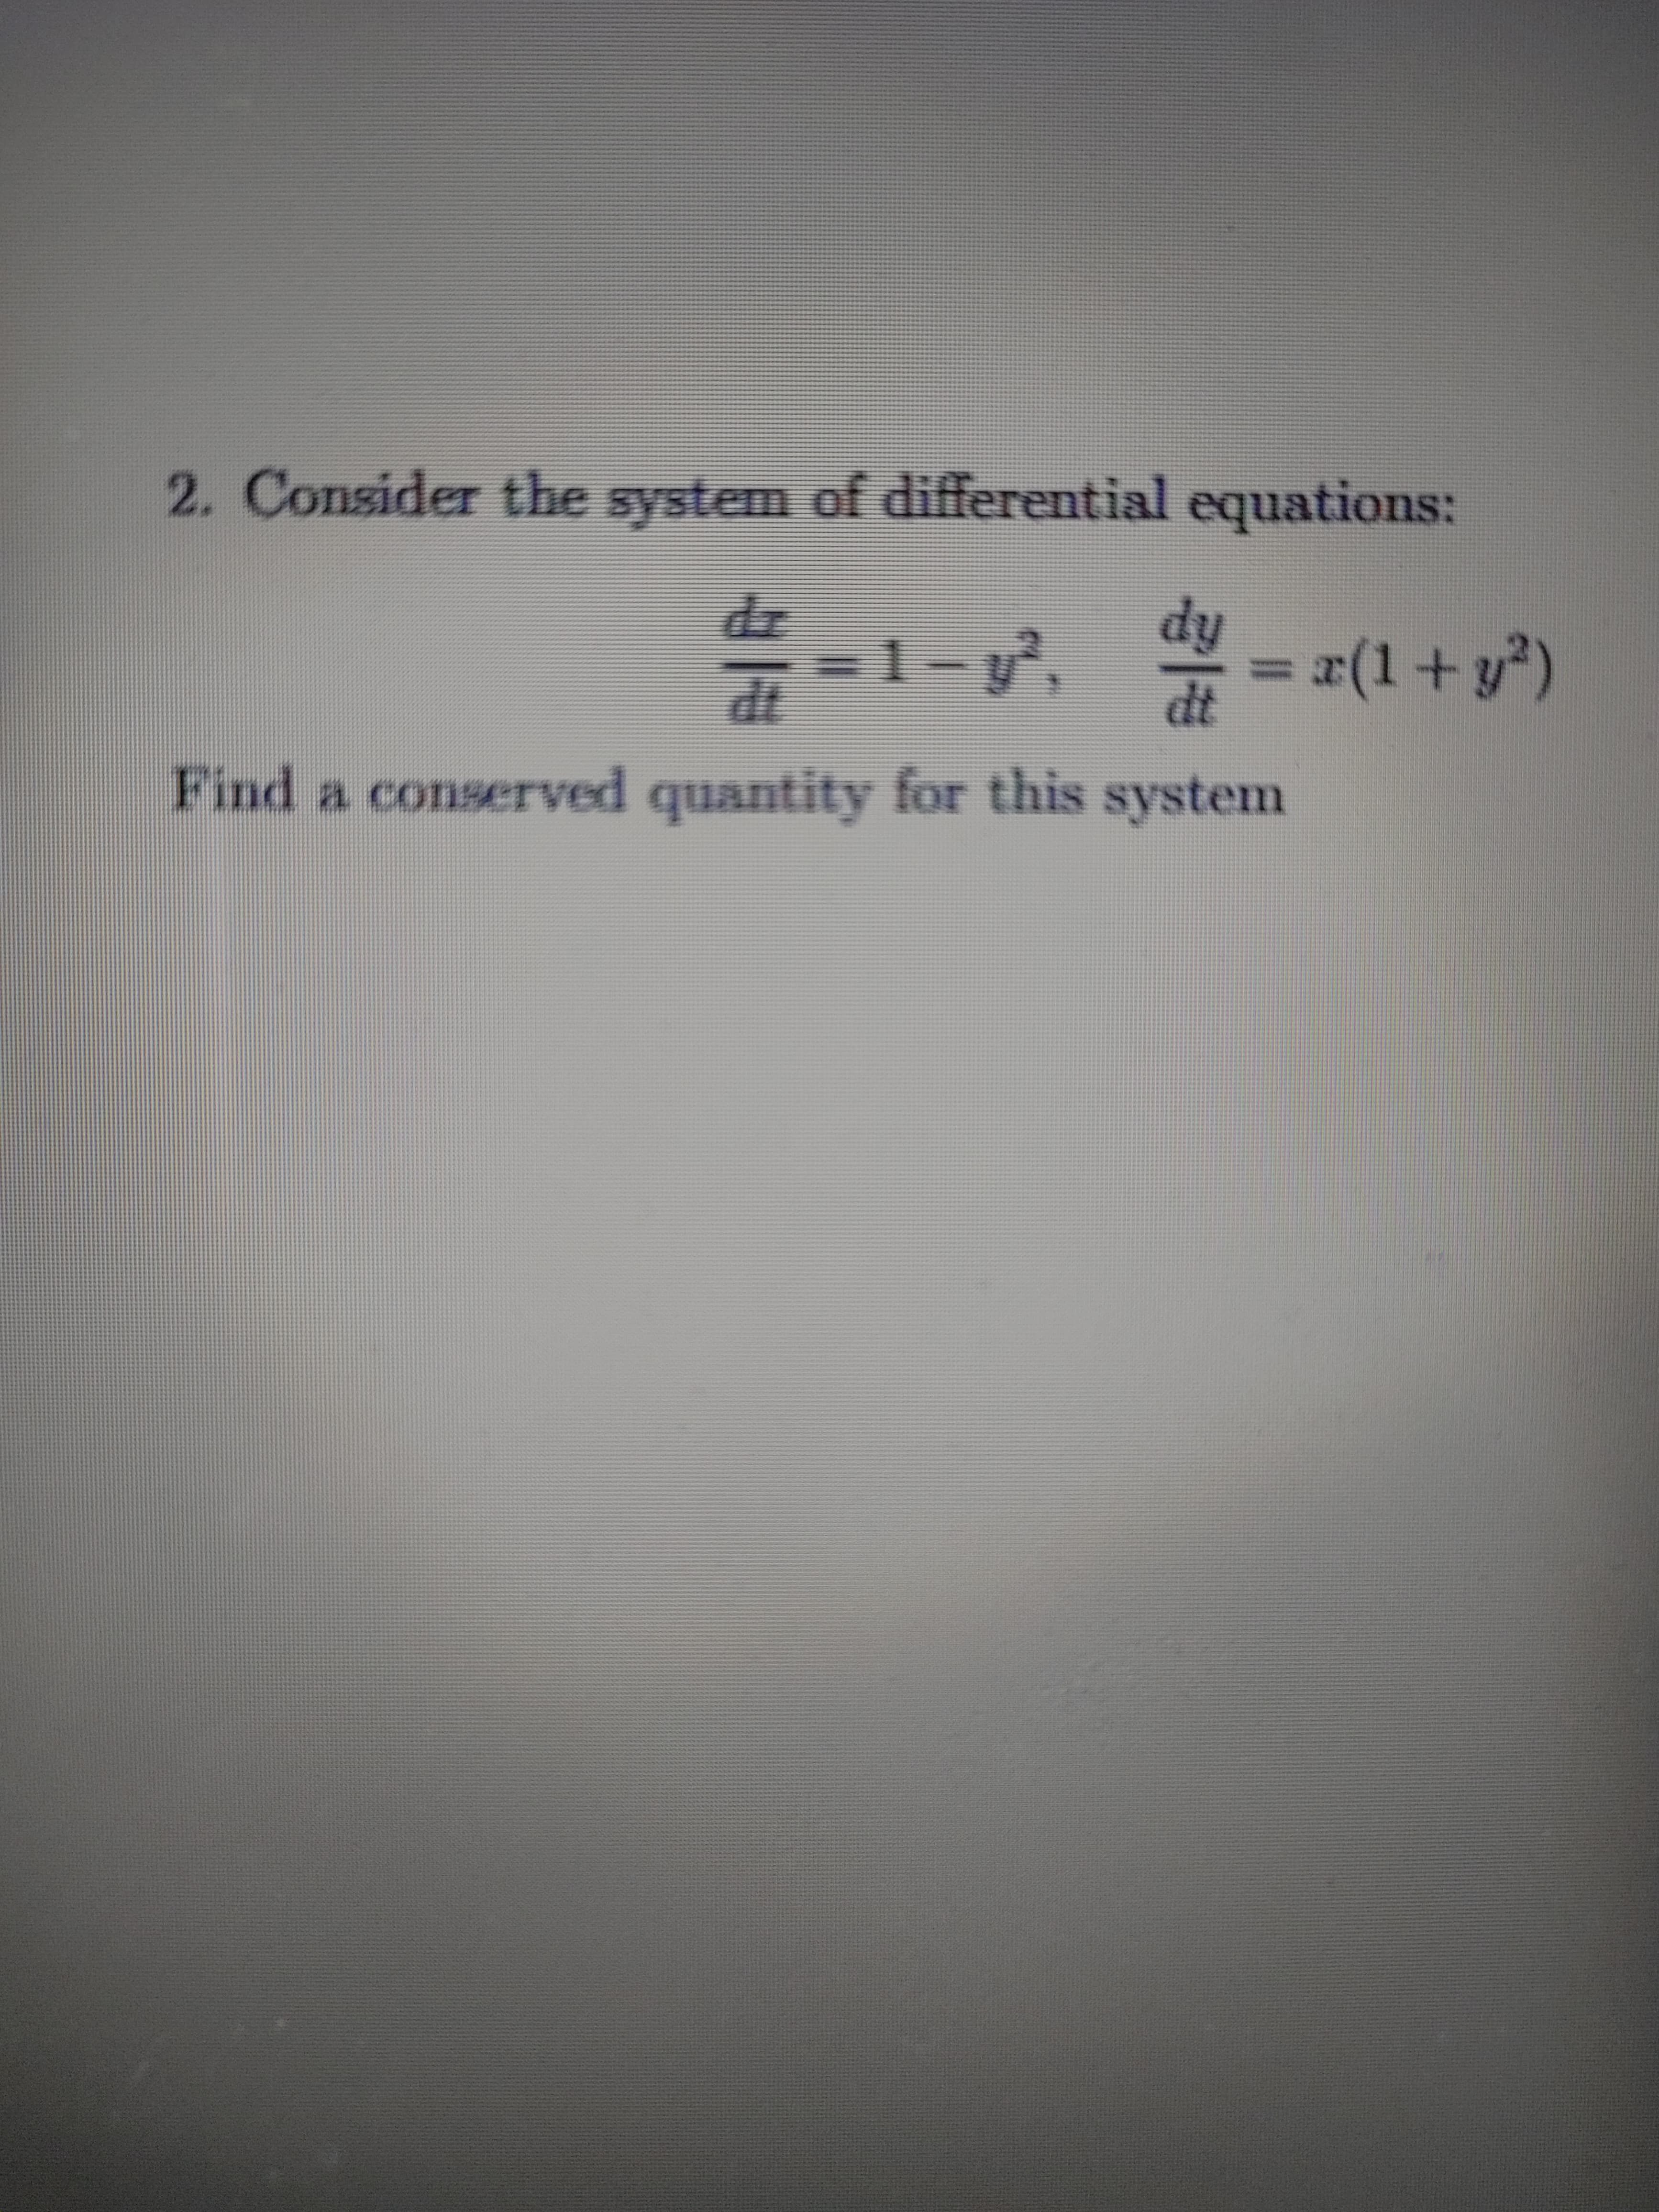 2. Consider the system of differential equations:
dr
dy
=1- y², = =(1+ y*)
%3D
dt
Find a conserved quantity for this system
